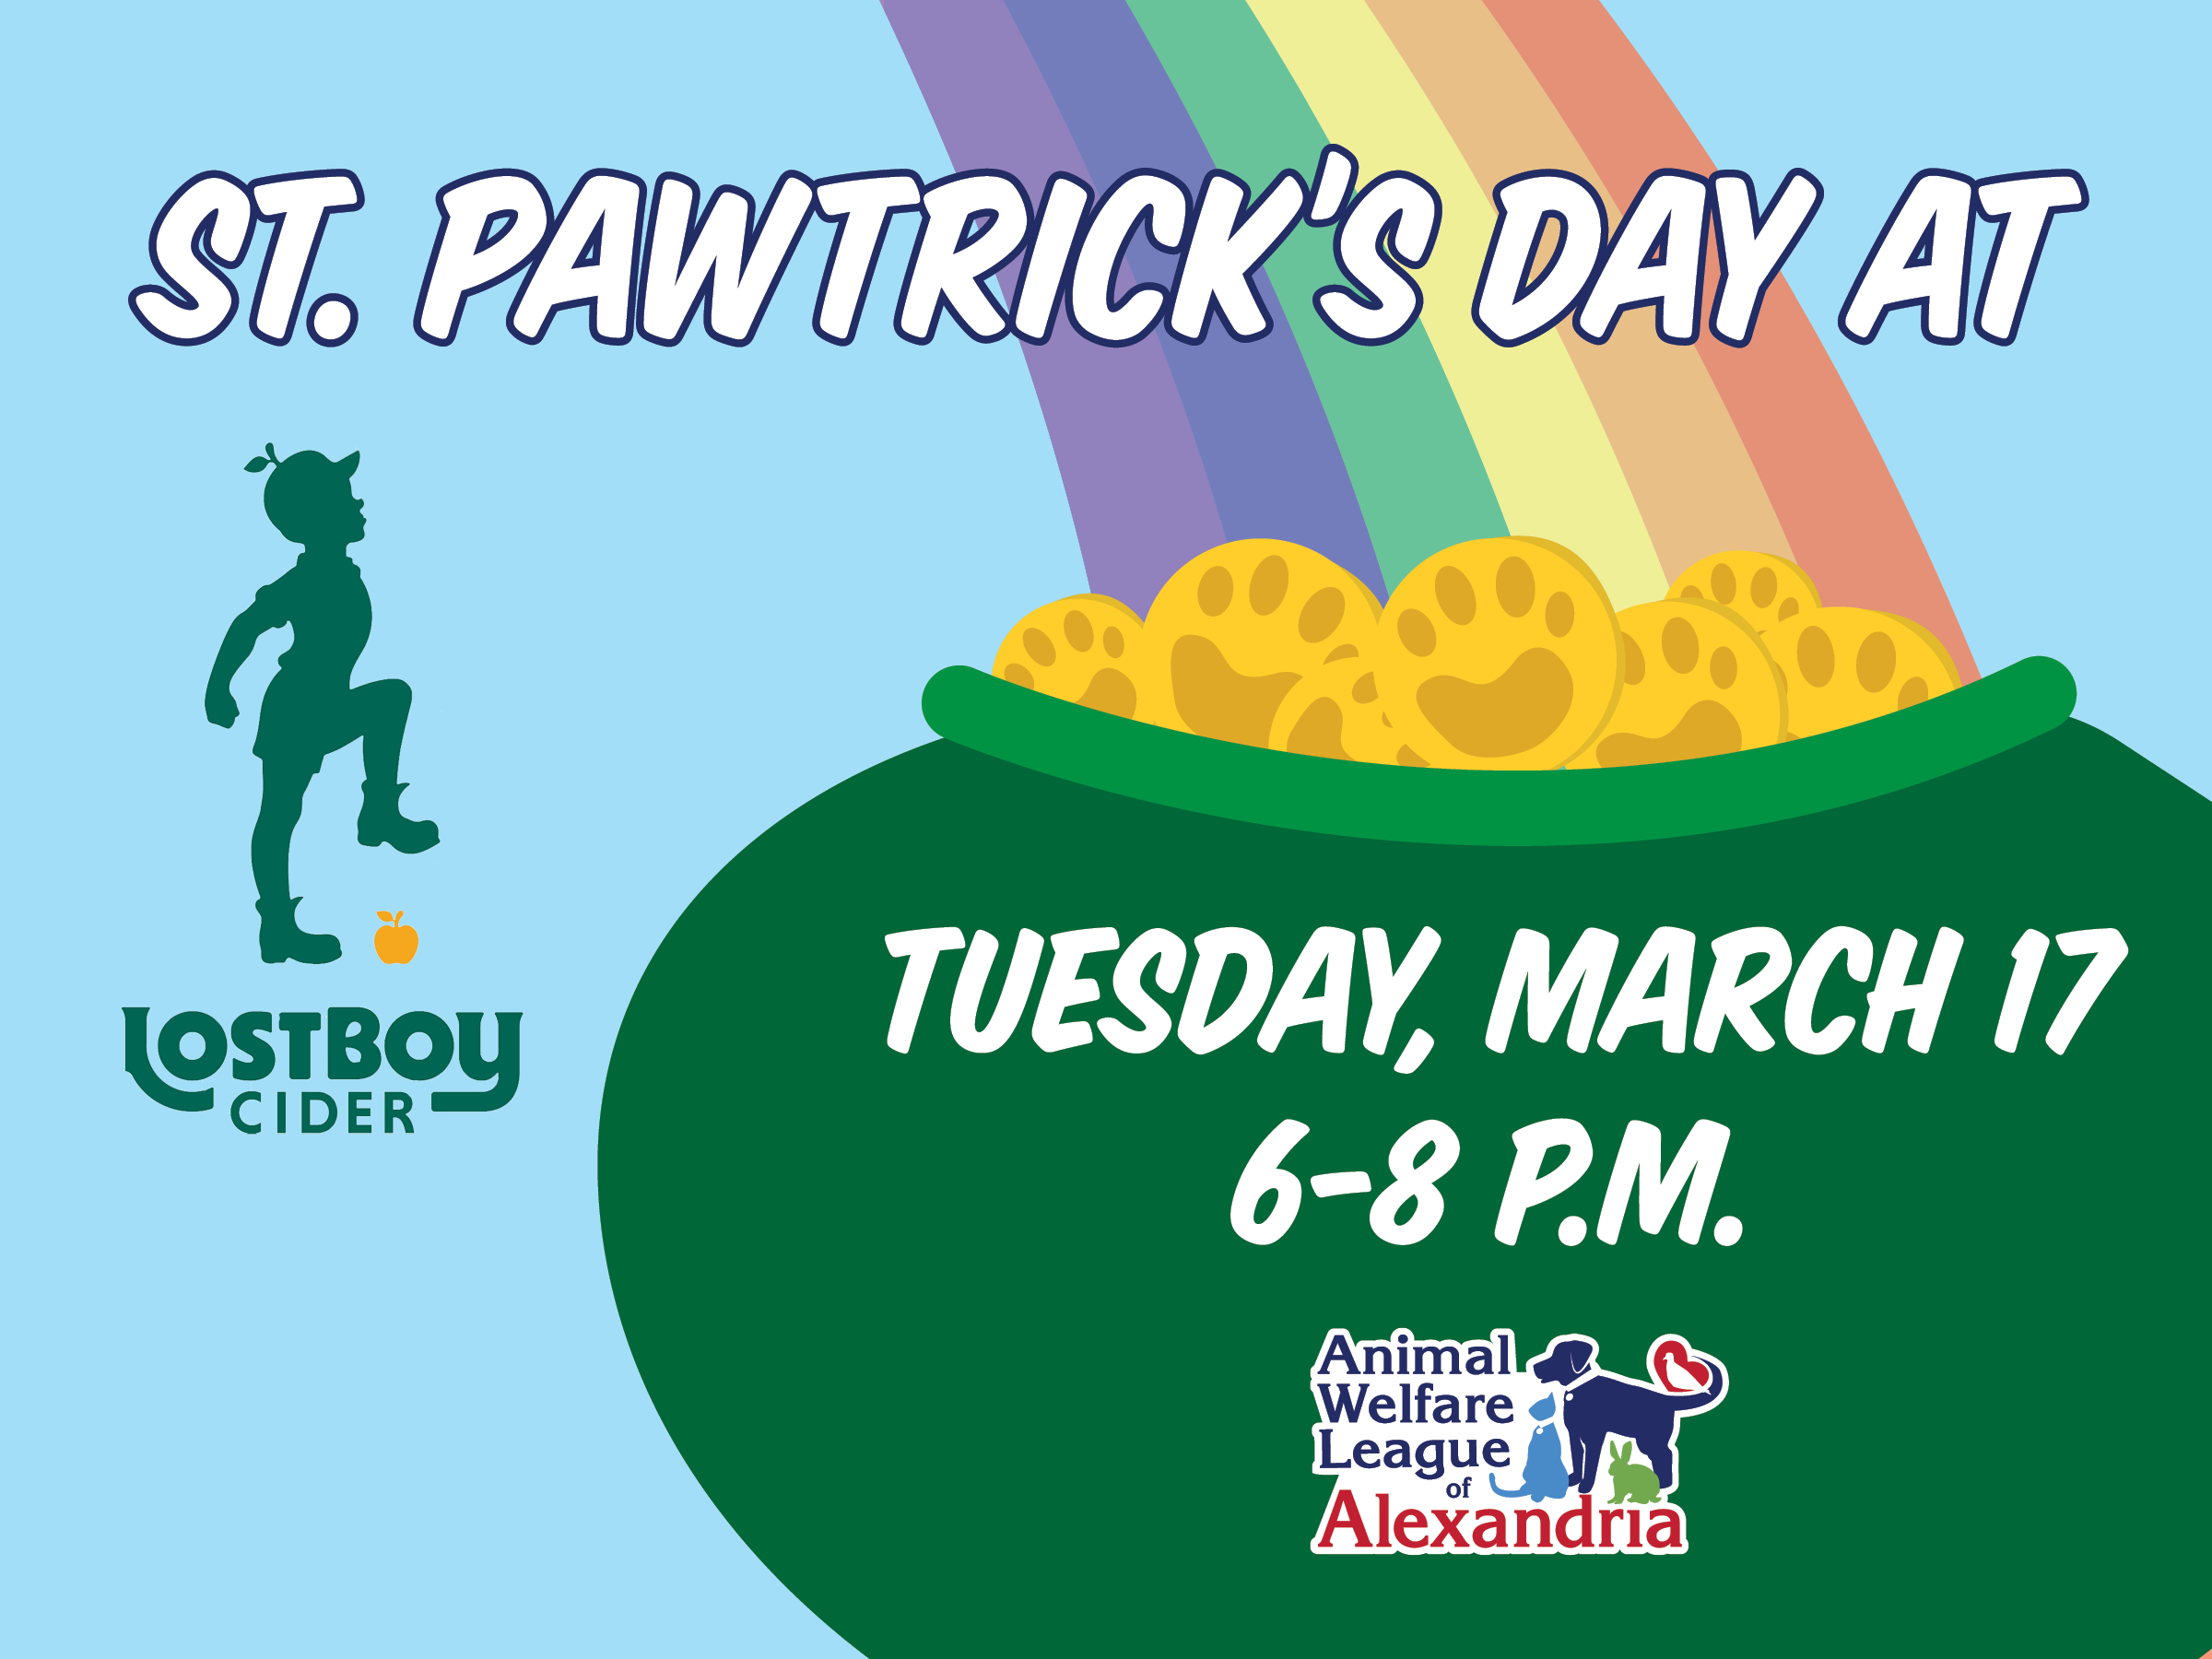 St. Pawtrick's Day at AWLA